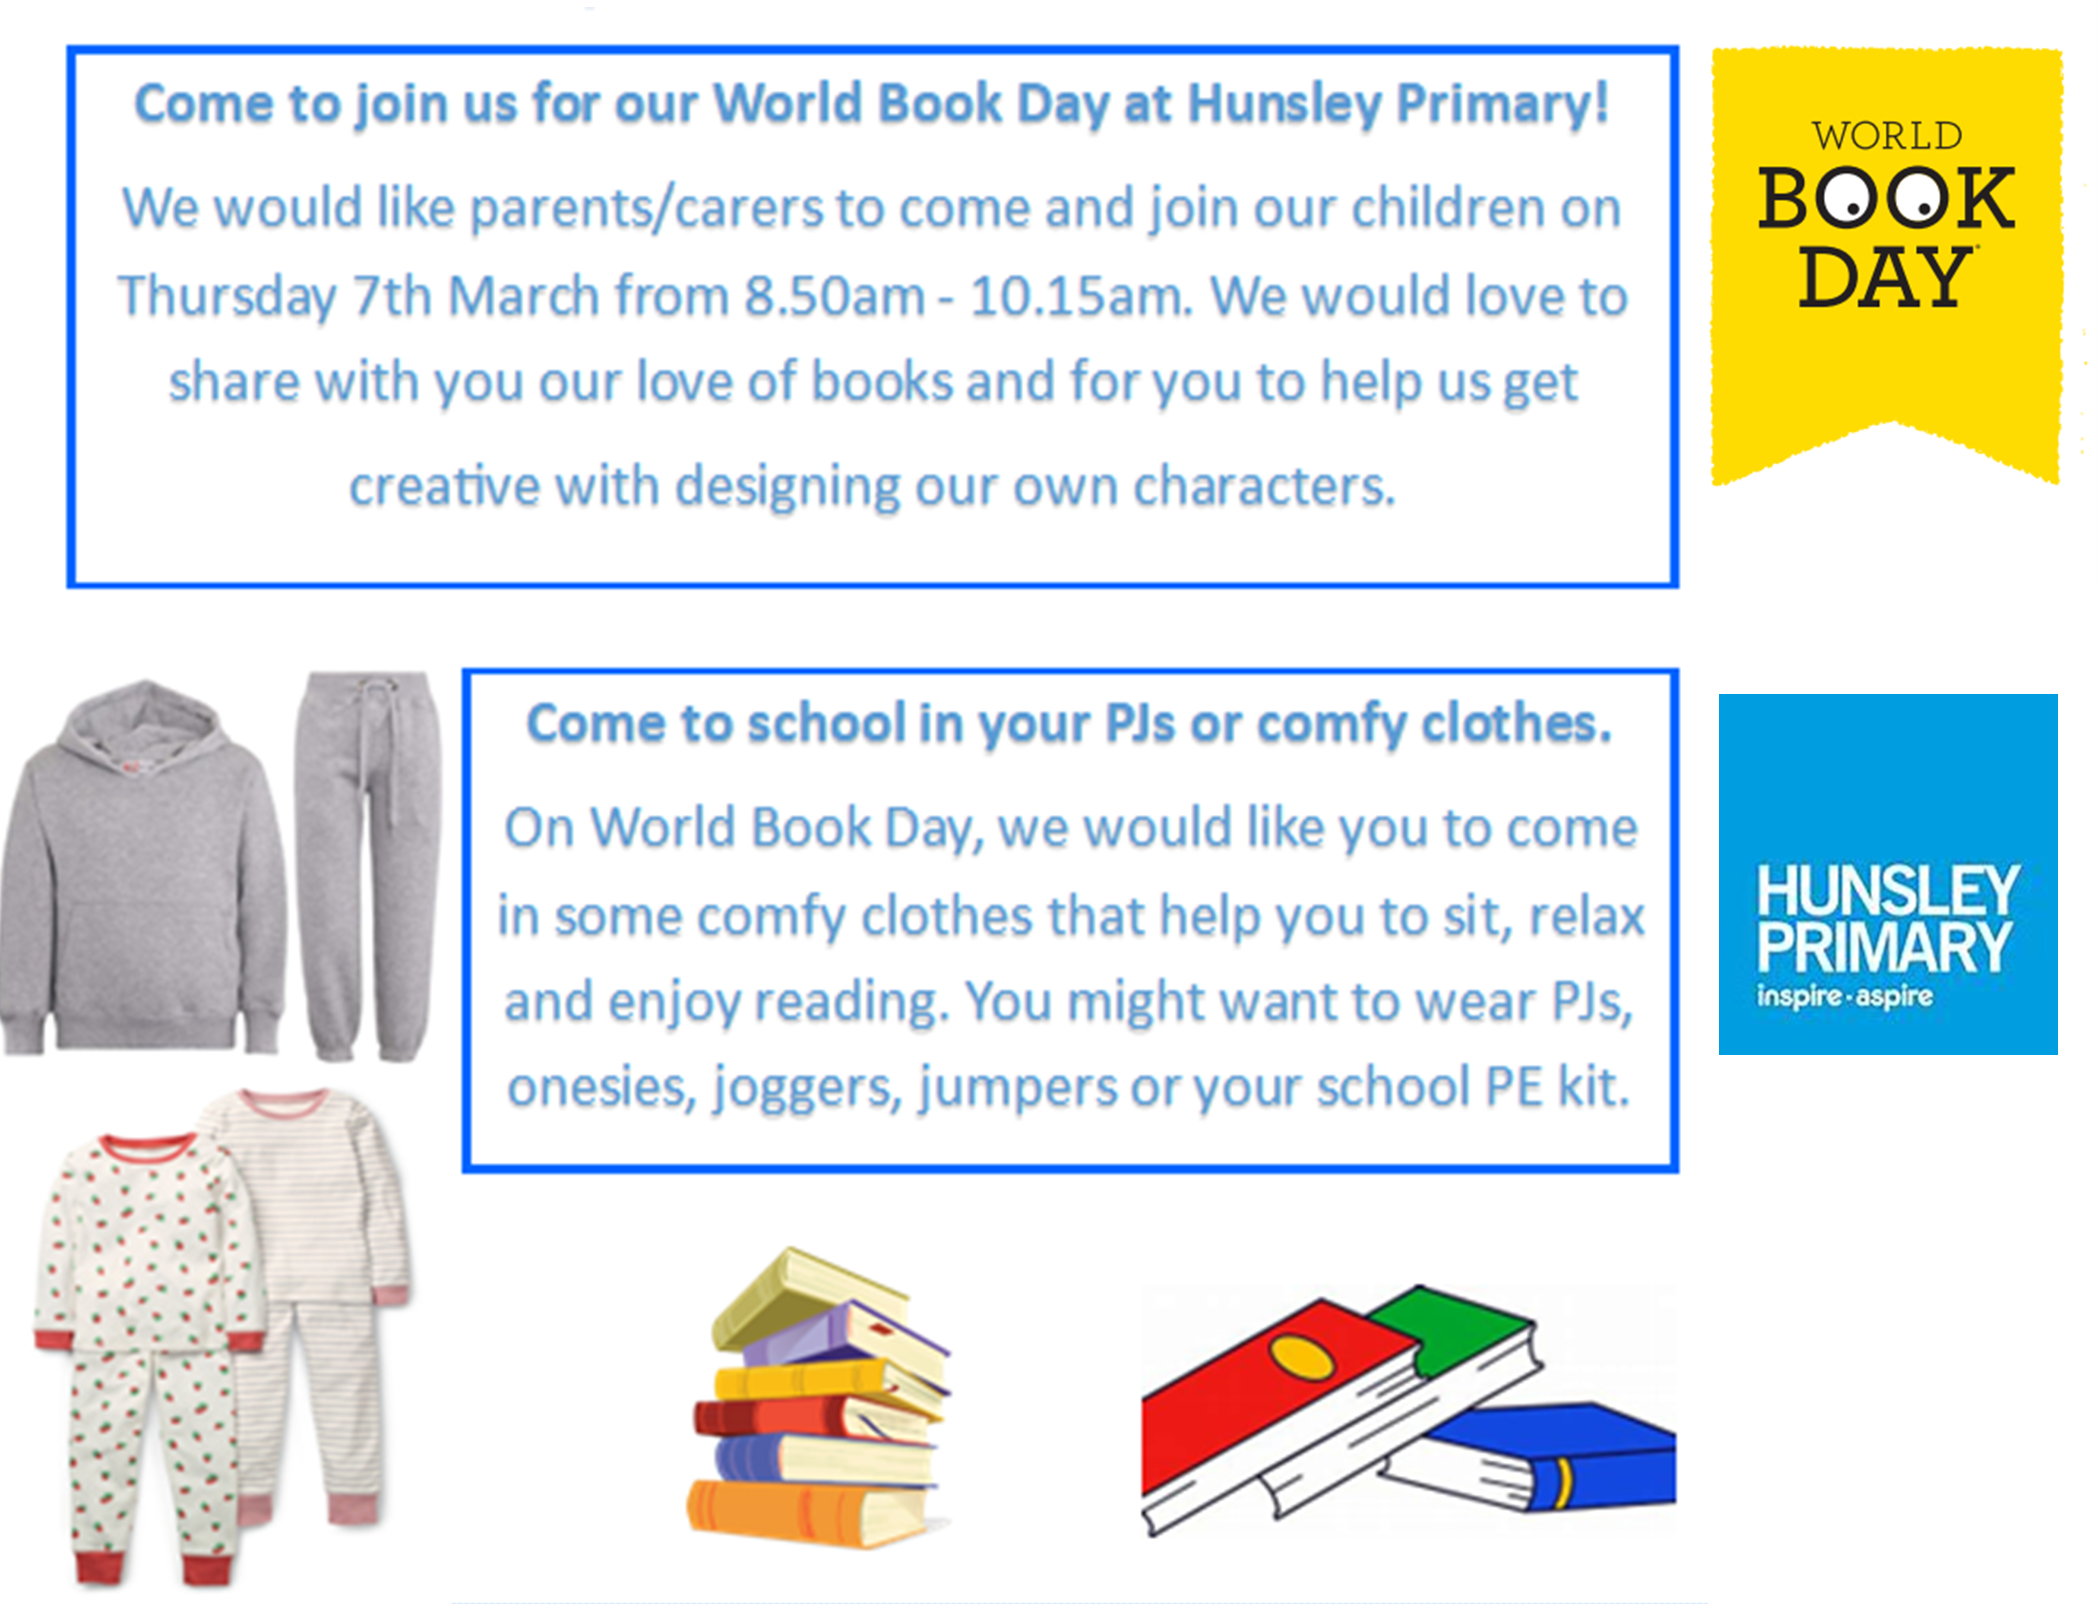 Parents_Carers_world book day